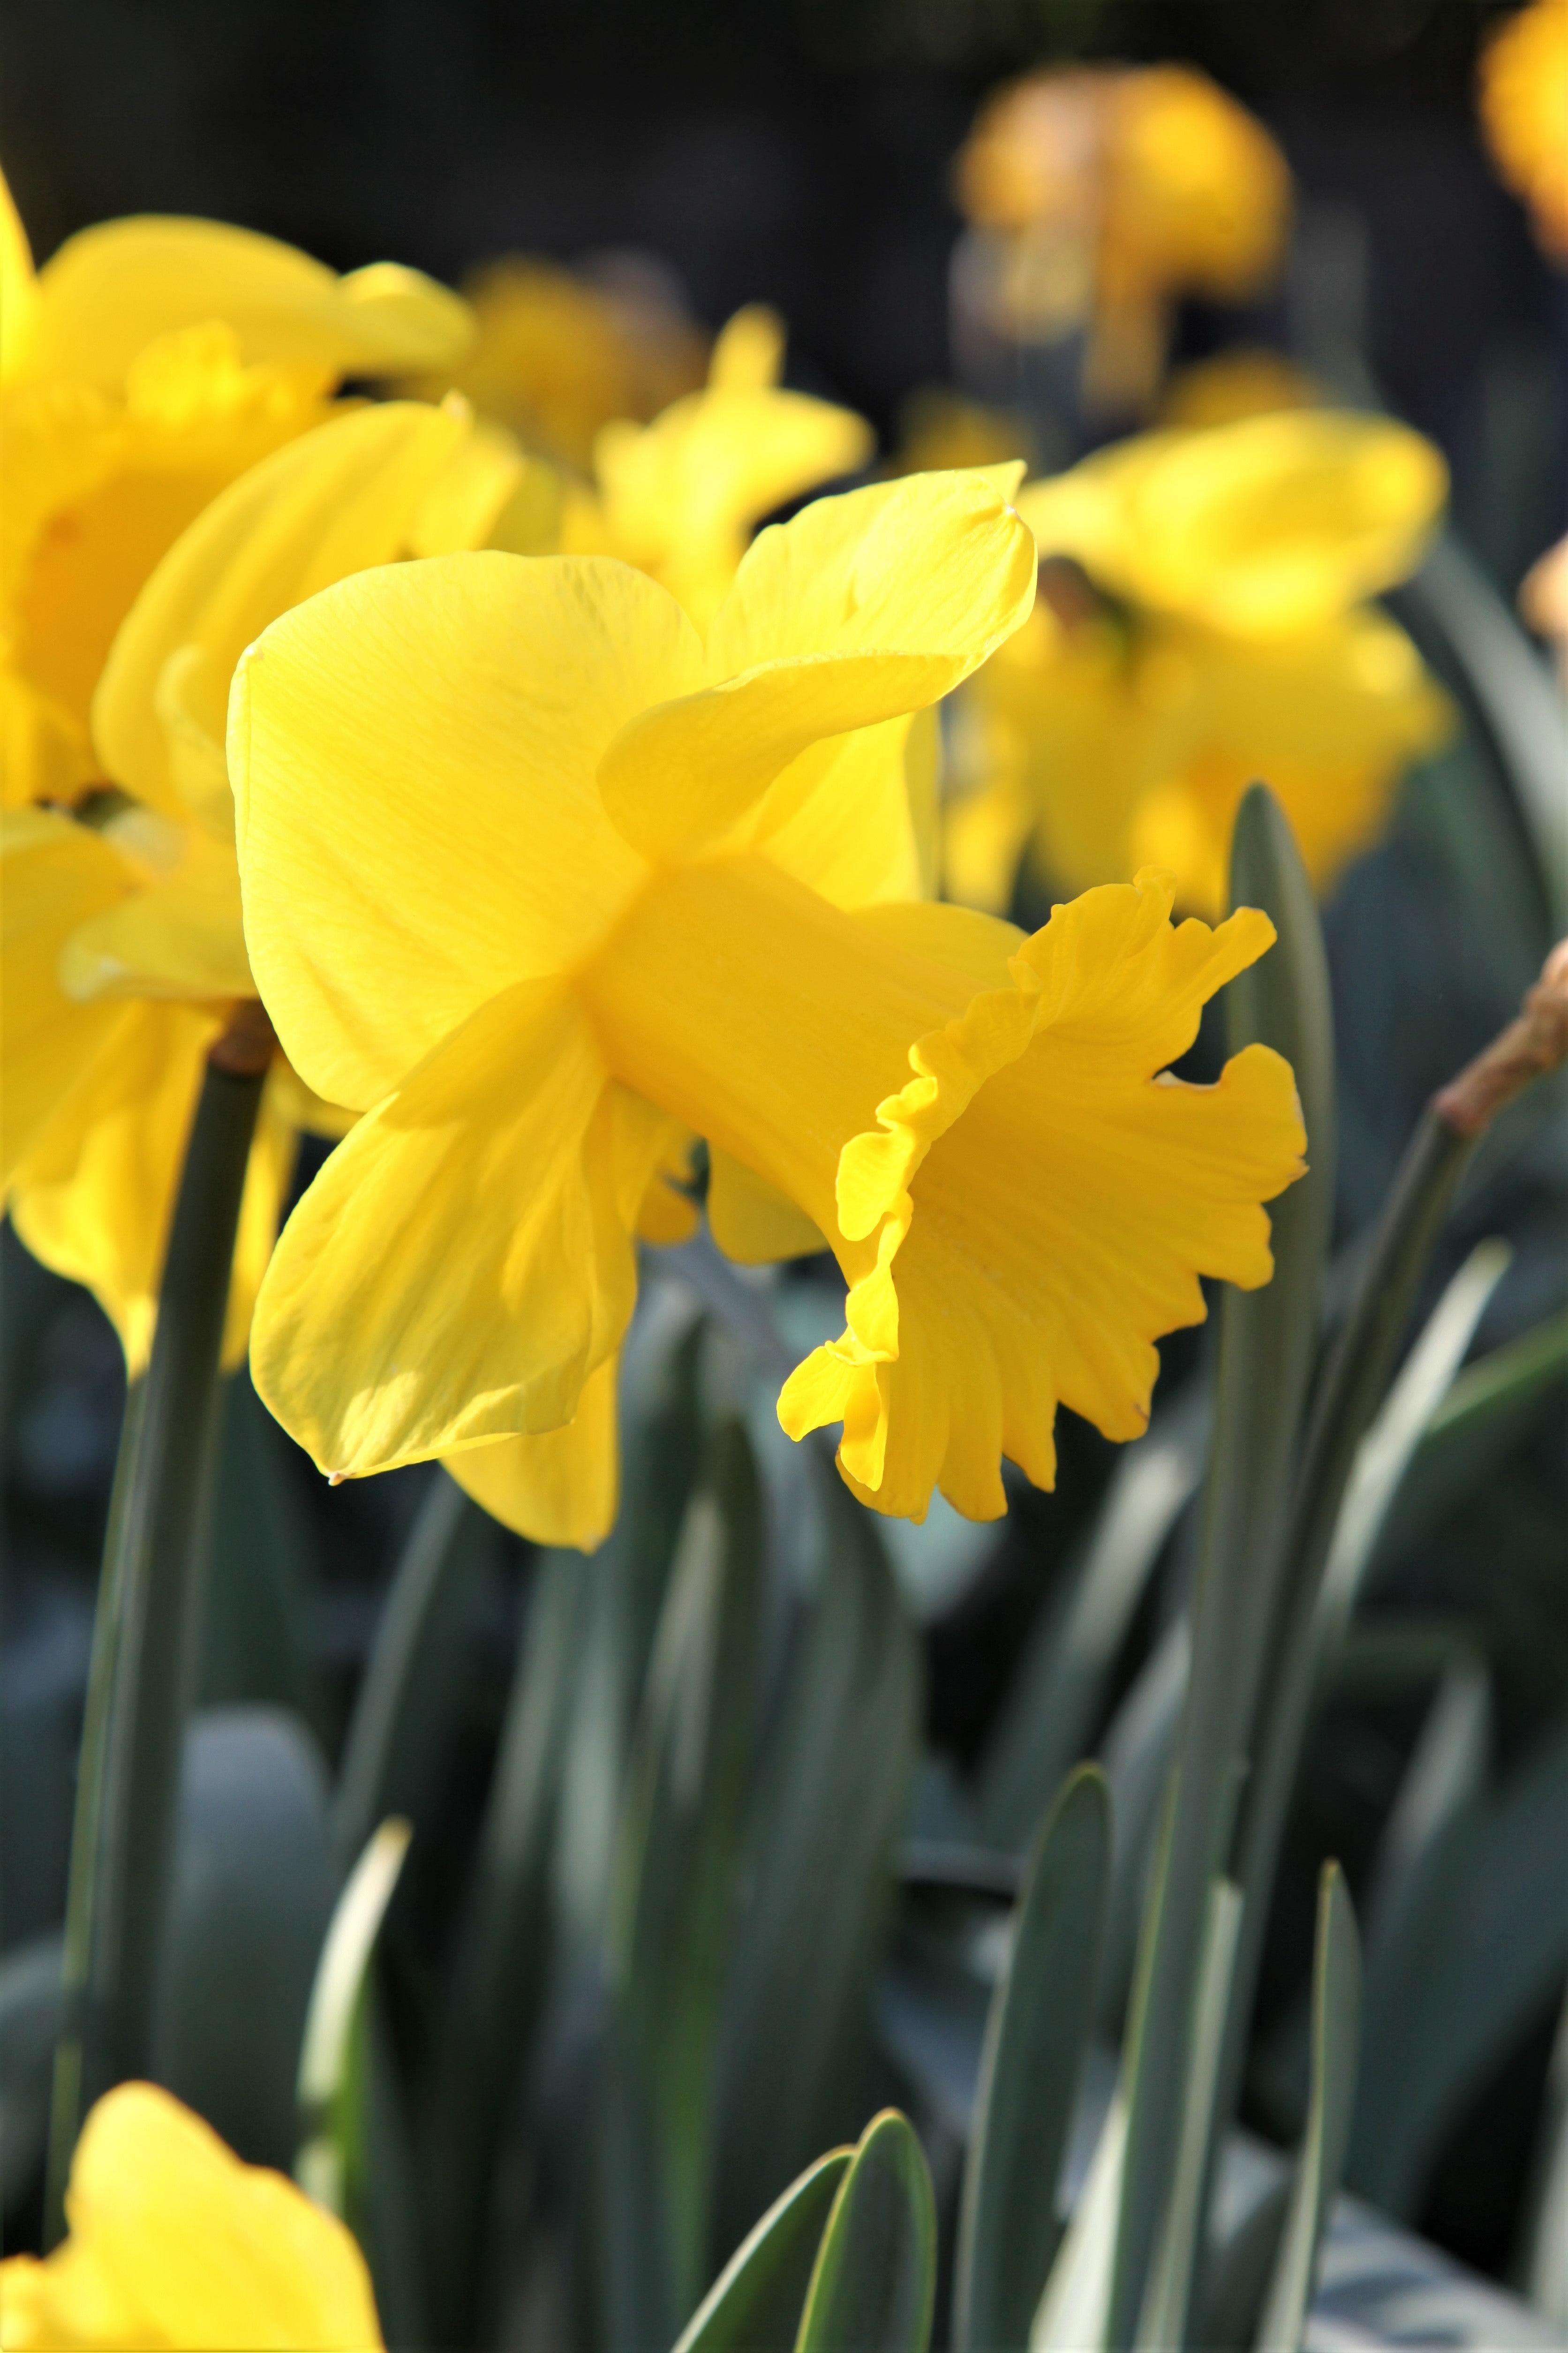 Exquisite Exception daffodil blooms with striking golden petals and beauty.